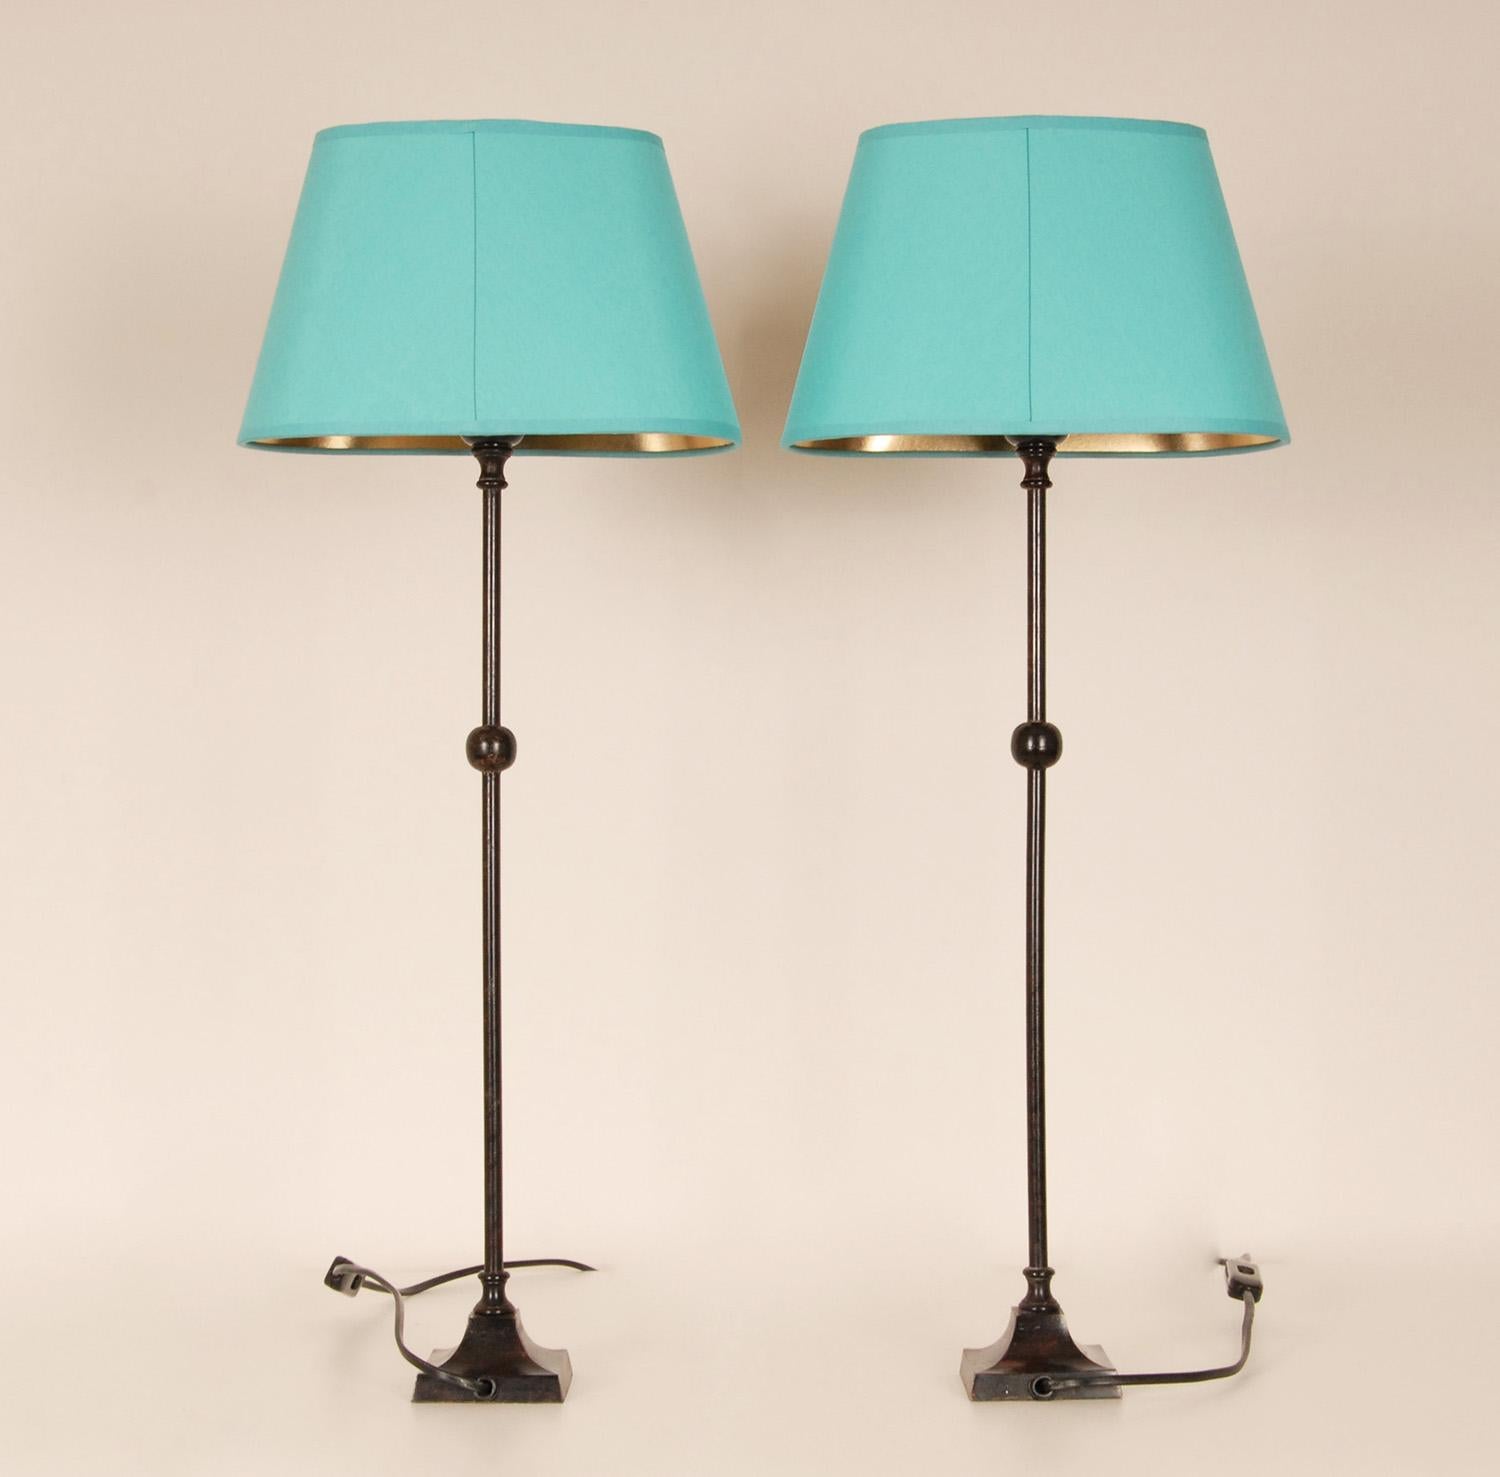 Fabric Mid Century Table lamps Wrought Iron Black and Turquoise Modern Lamps a Pair